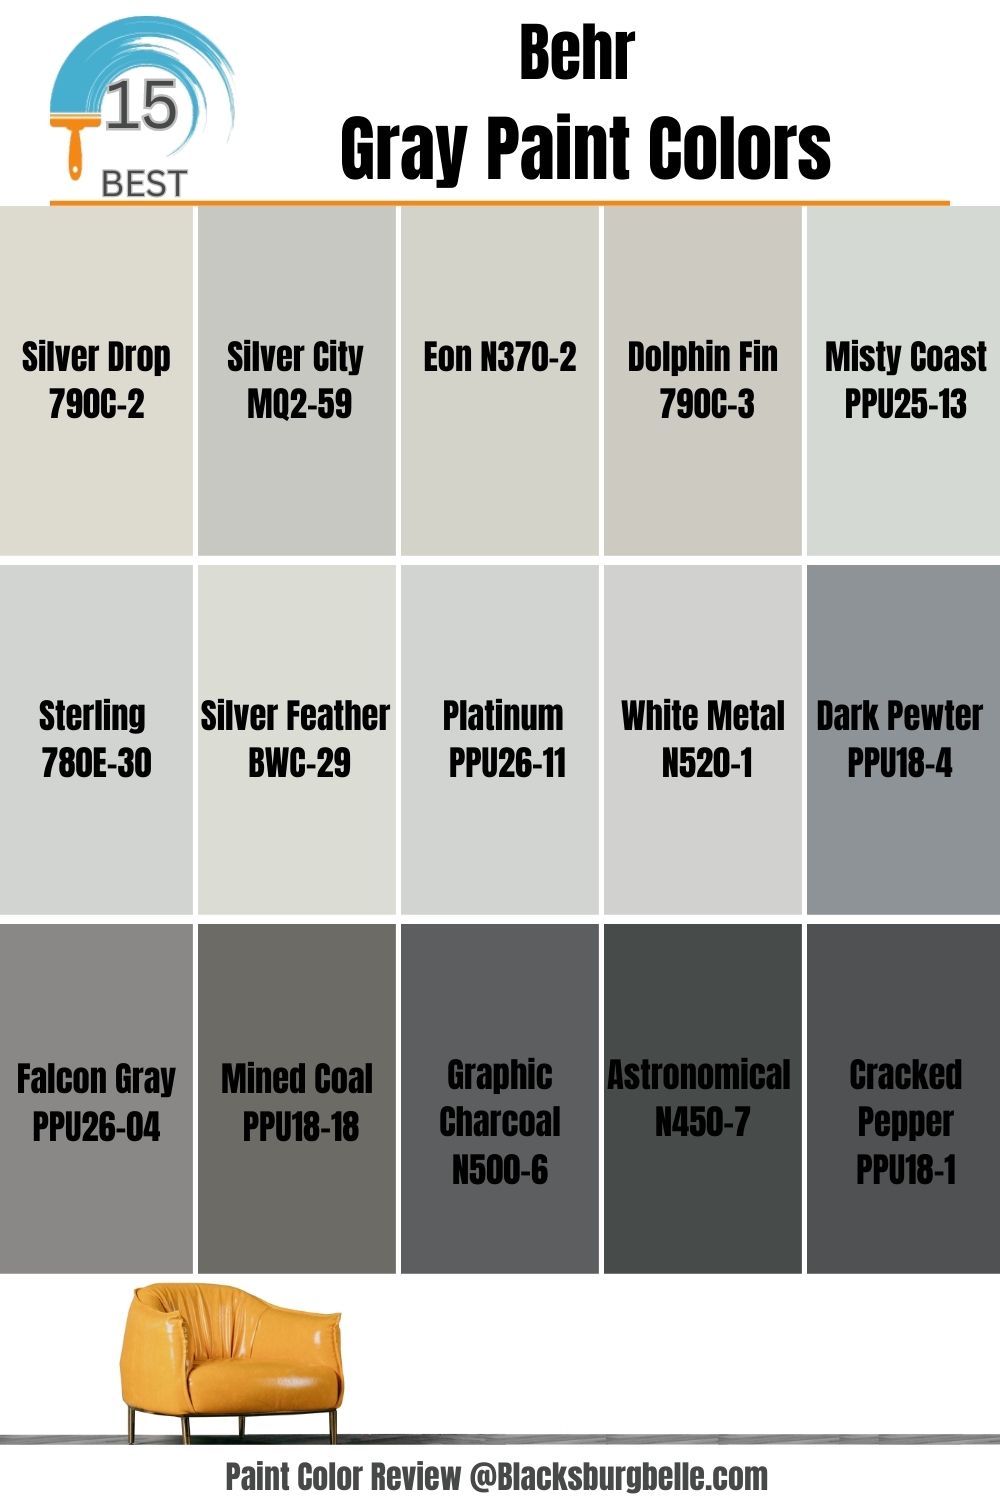 15 Most Popular Behr Gray Paint Colors From Light to Dark